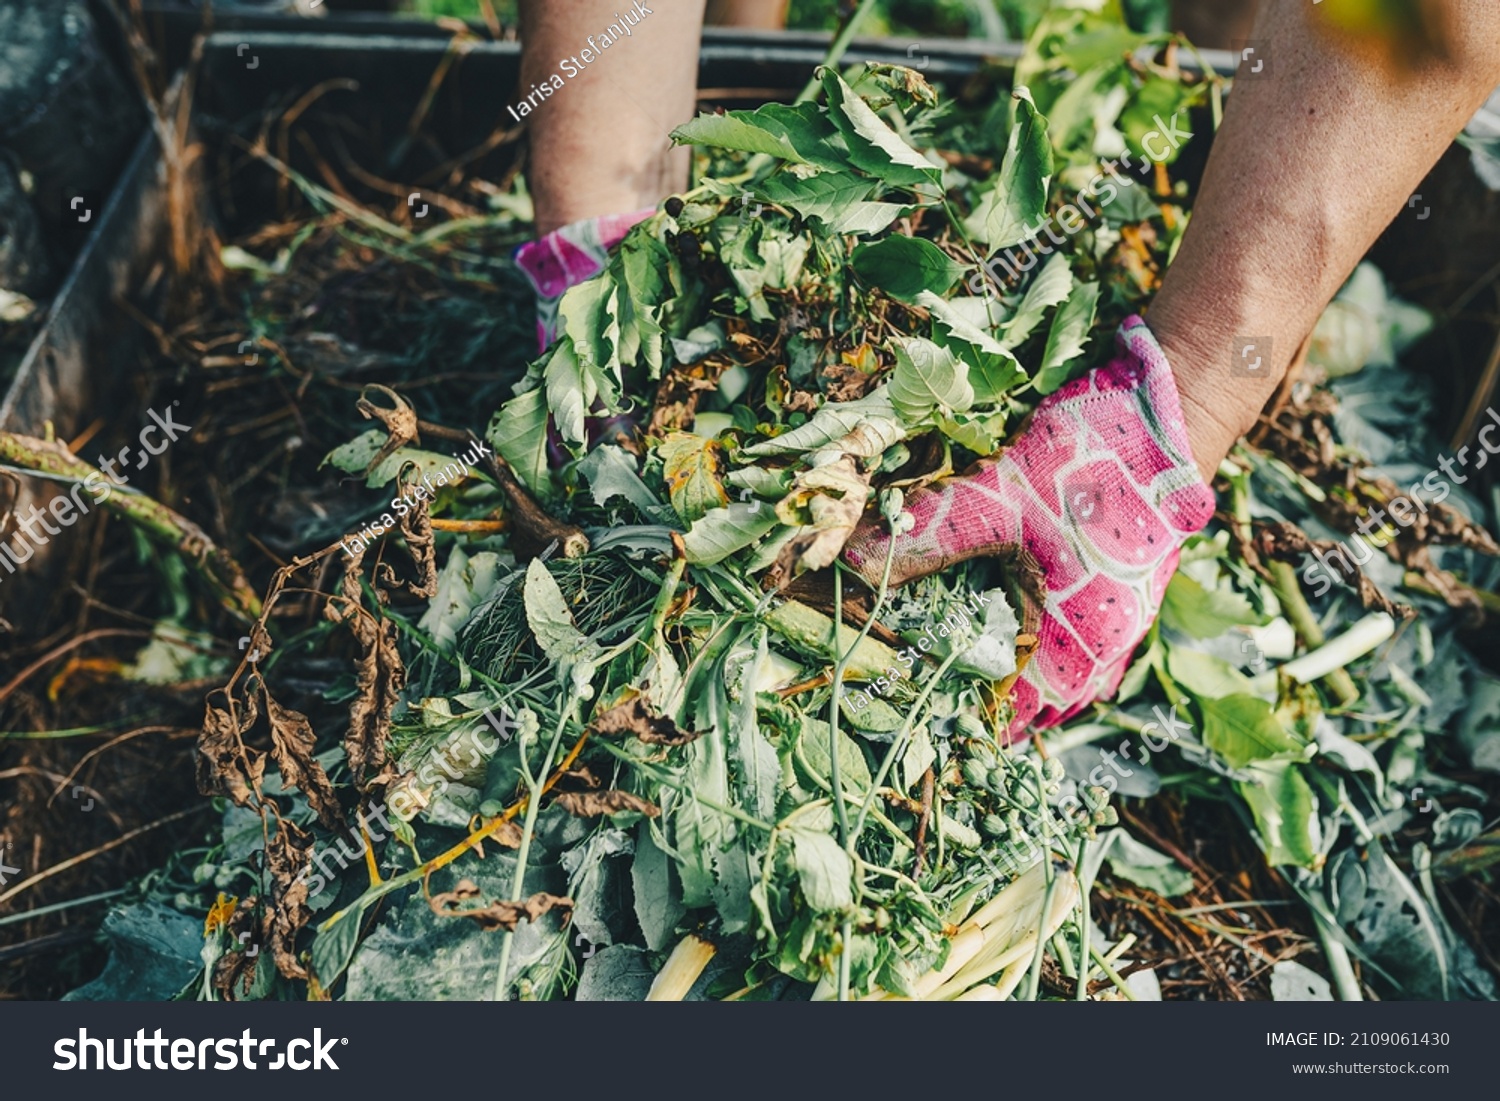 gardener's hands in gardening gloves are sorting through compost heap with humus, in backyard. Recycling natural product waste into compost heap to improve soil fertility. Processing agricultural wast #2109061430